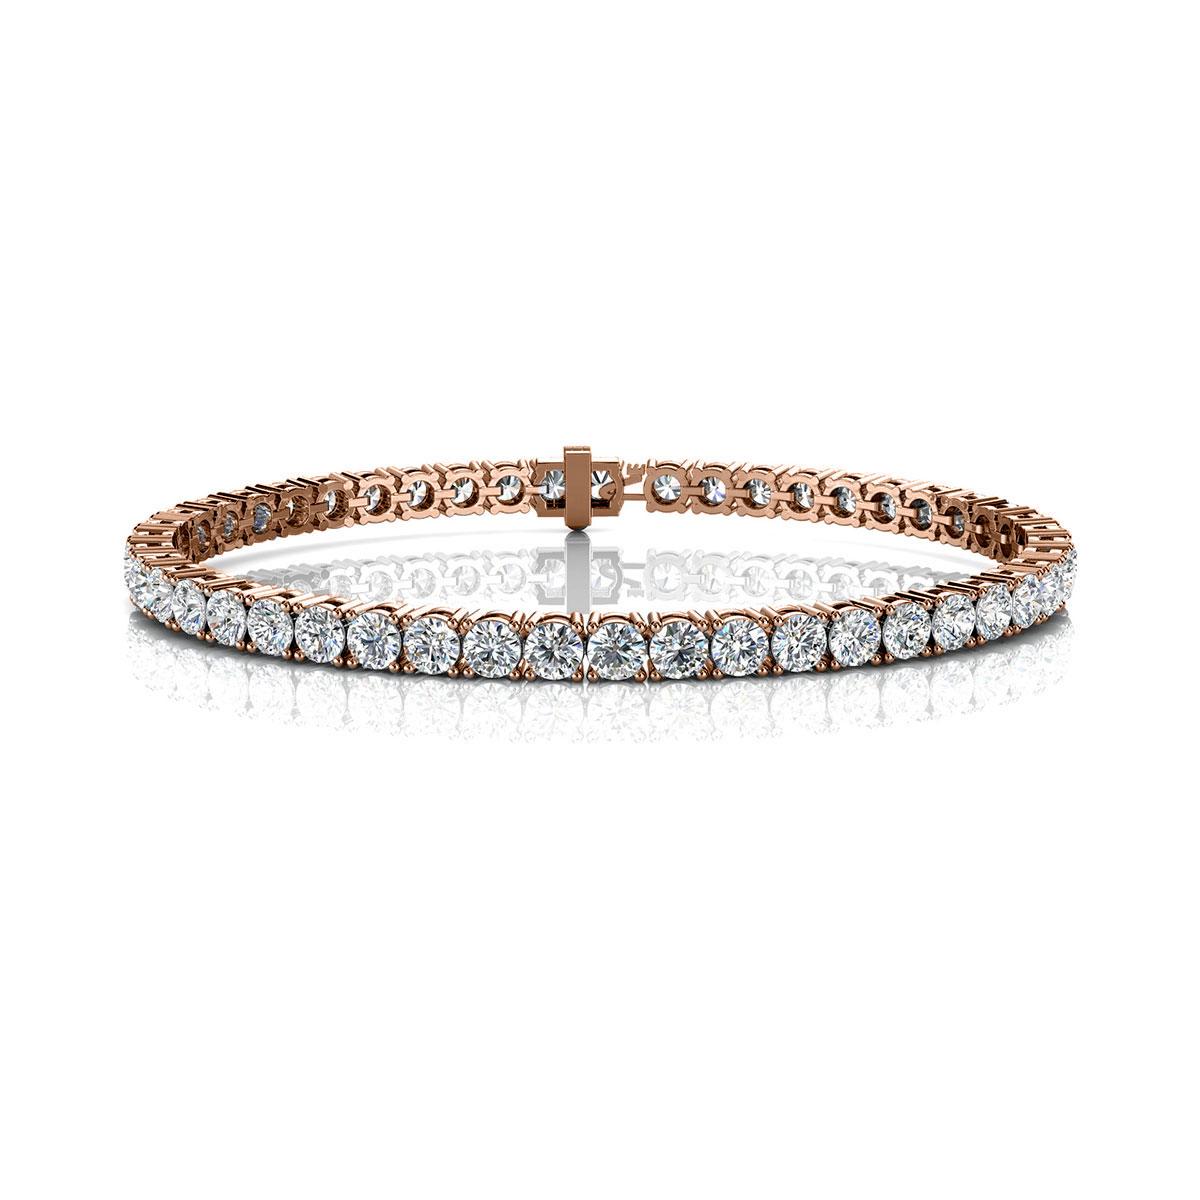 A timeless four prongs diamonds tennis bracelet. Experience the Difference!

Product details: 

Center Gemstone Type: NATURAL DIAMOND
Center Gemstone Color: WHITE
Center Gemstone Shape: ROUND
Center Diamond Carat Weight: 7
Metal: 14K Rose Gold
Metal